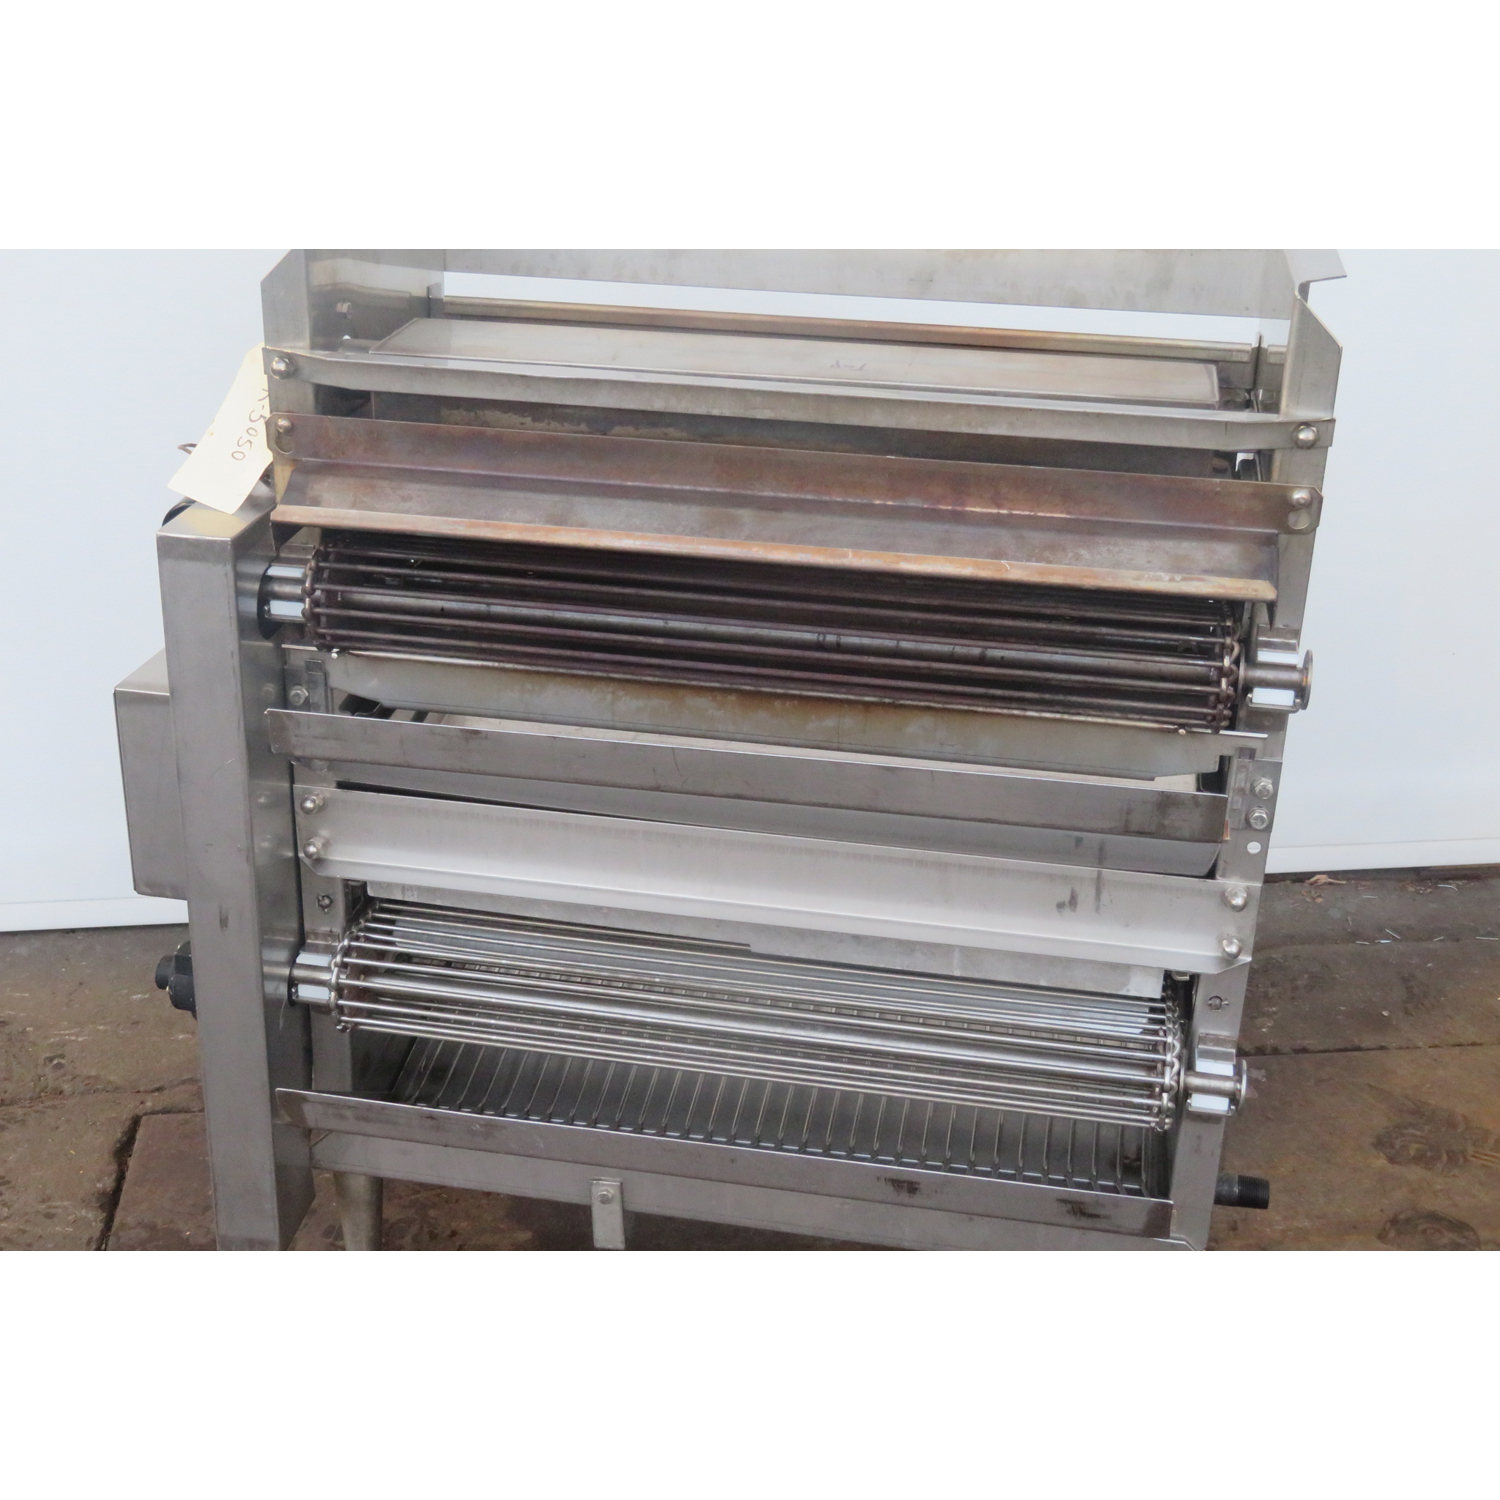 Nieco 424GRA Automatic Broiler, Sold As Is image 4